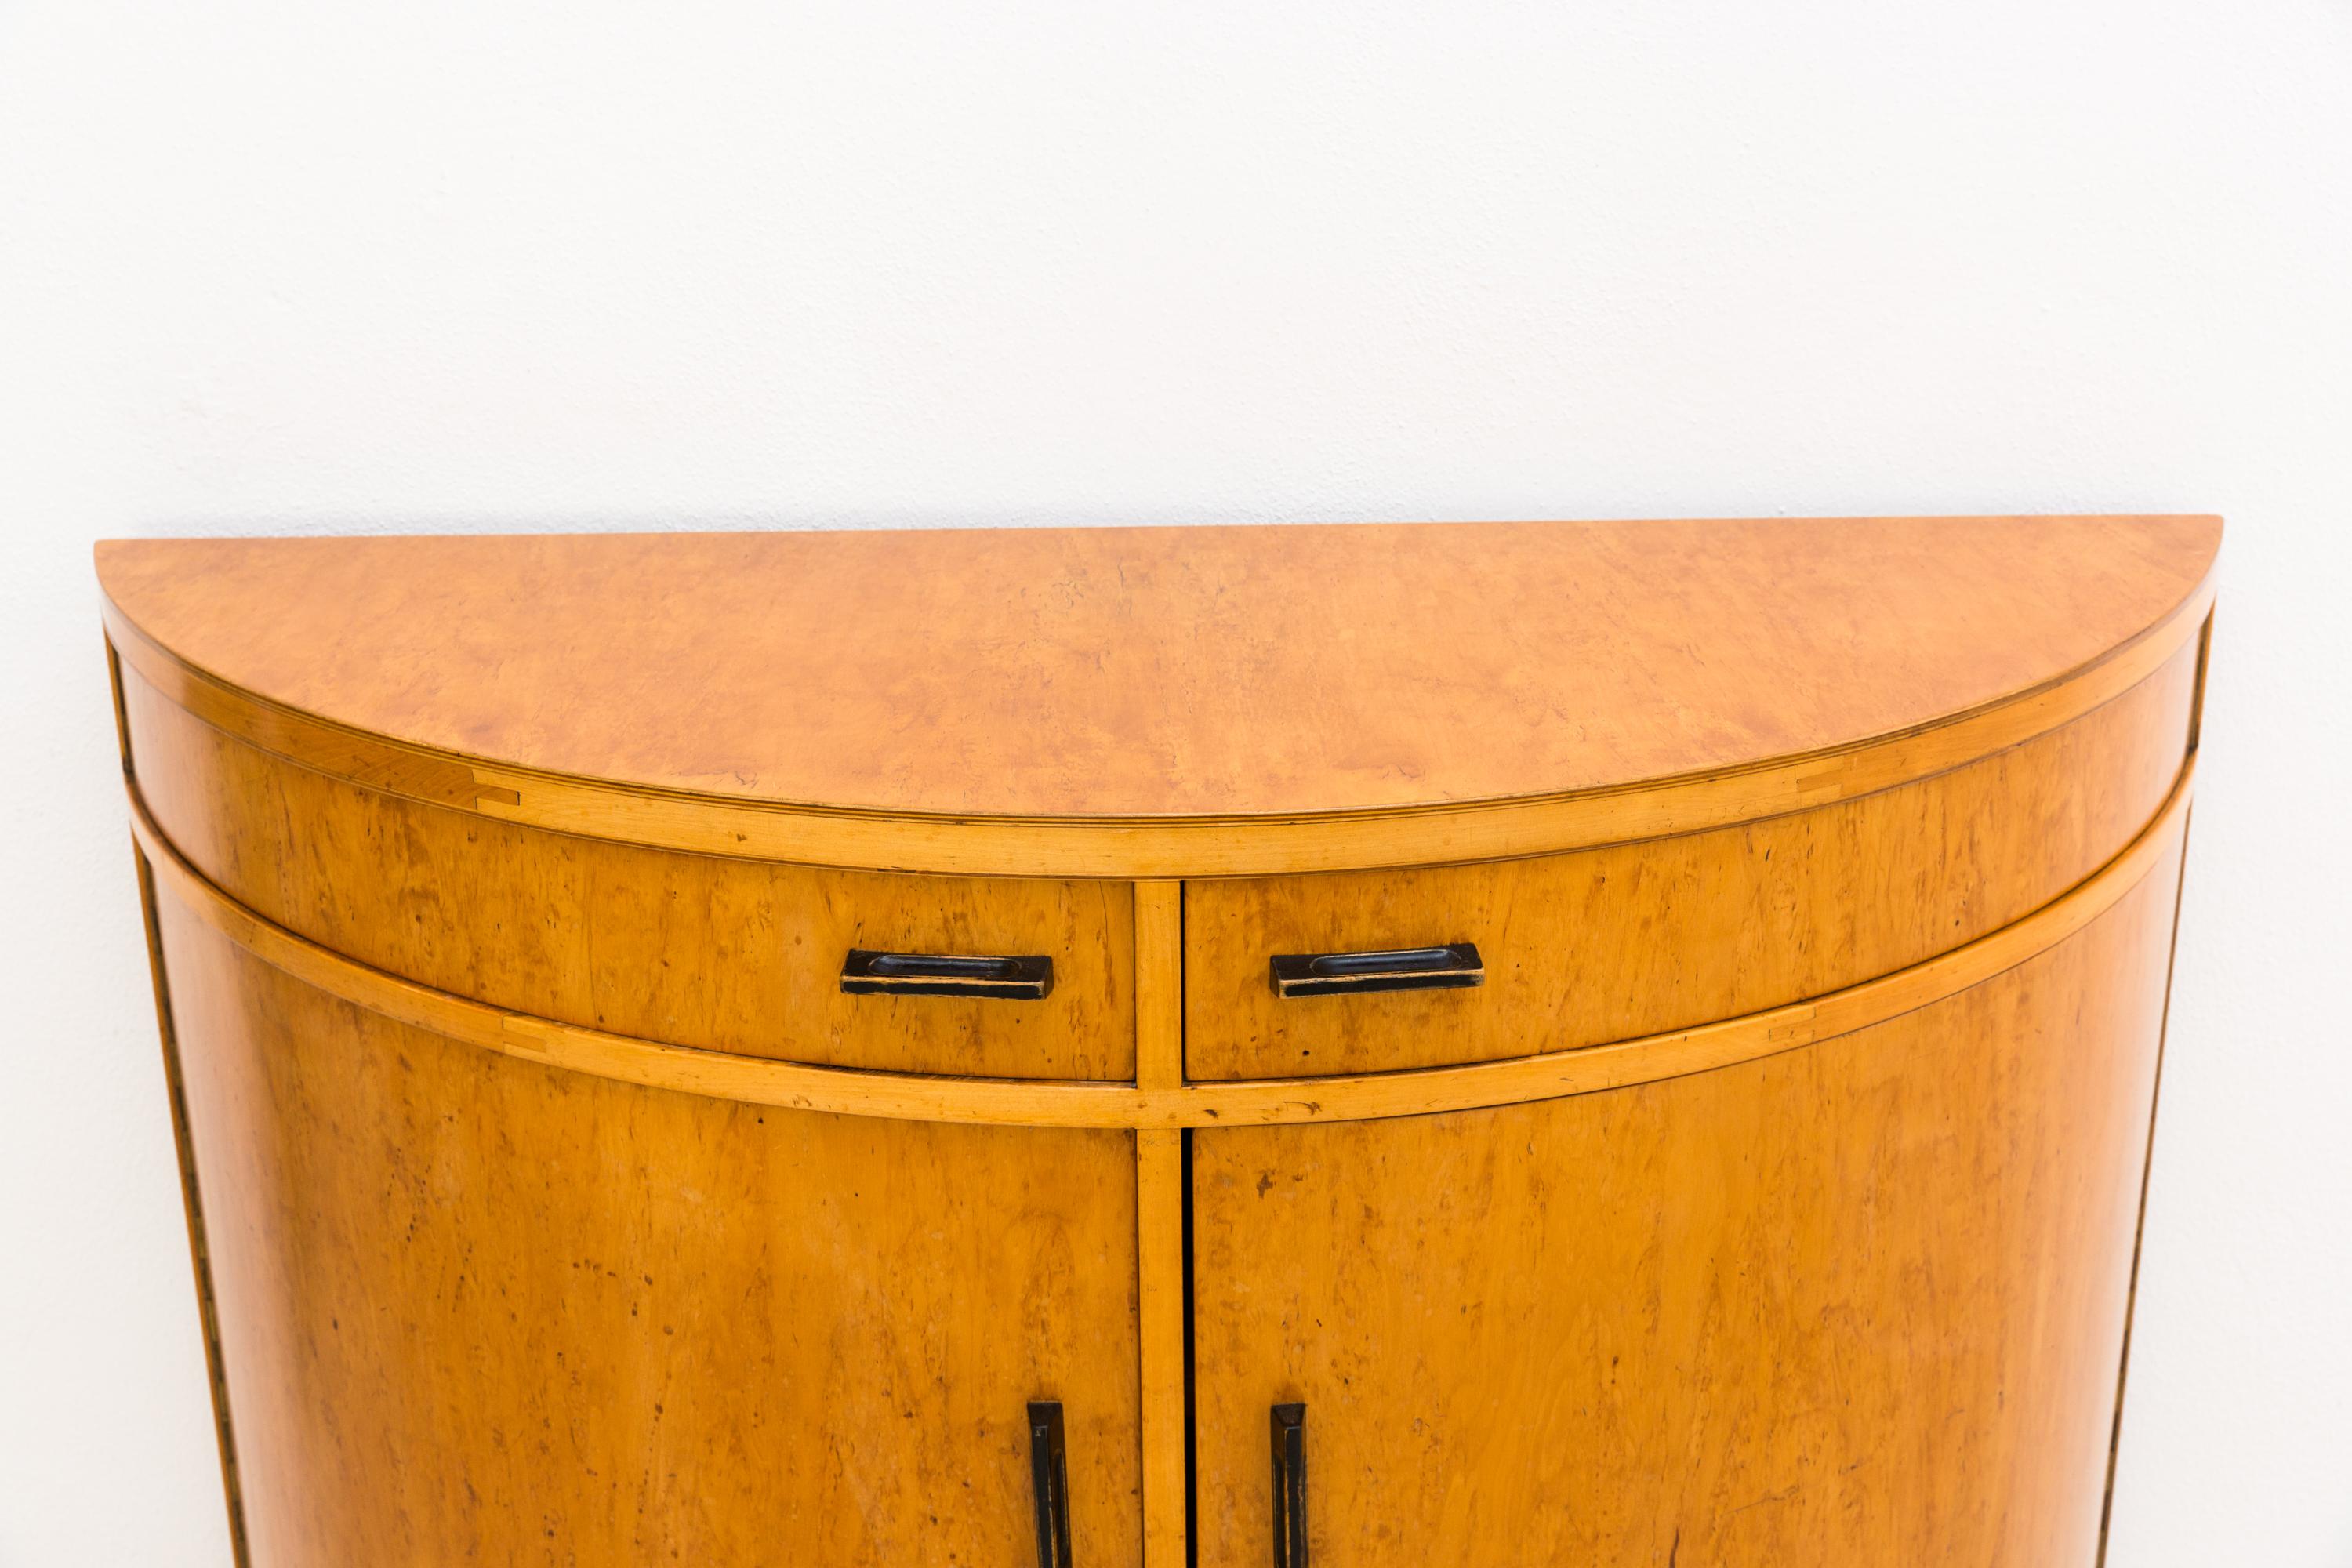 Incredibly beautiful half moon sideboard, designed by Alvar Aalto. From the private collection of Dr Kossdorf, labelled on the back, Finmar. Manufactured in 1935-1936, a rare and highly covetable historic piece, probably the only piece on the world